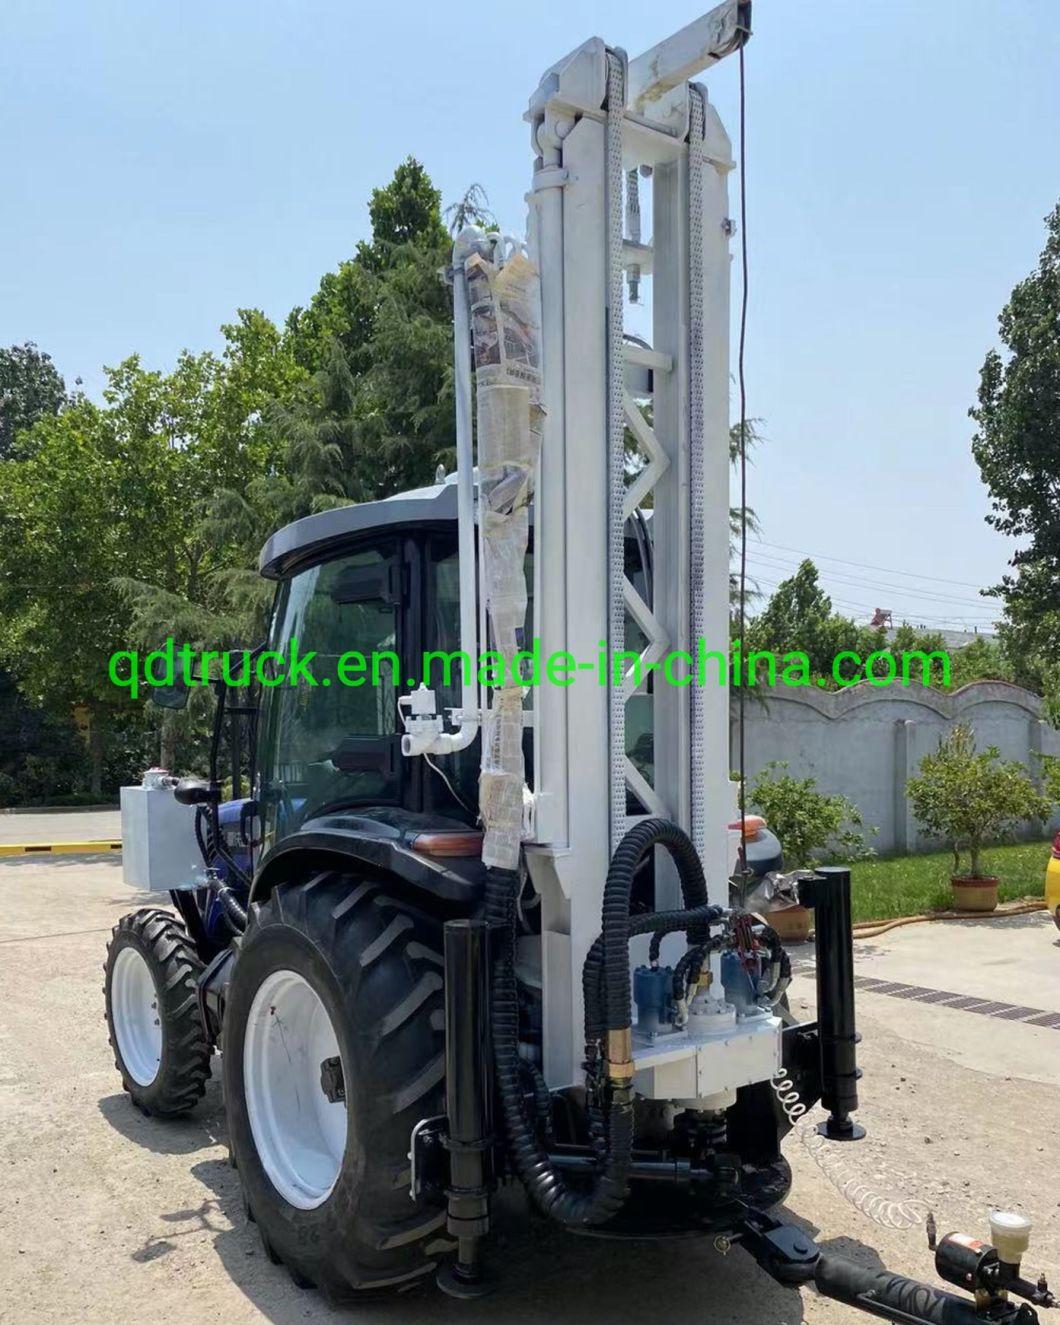 Tow air compressor tractor mounted water well impactor drilling rig